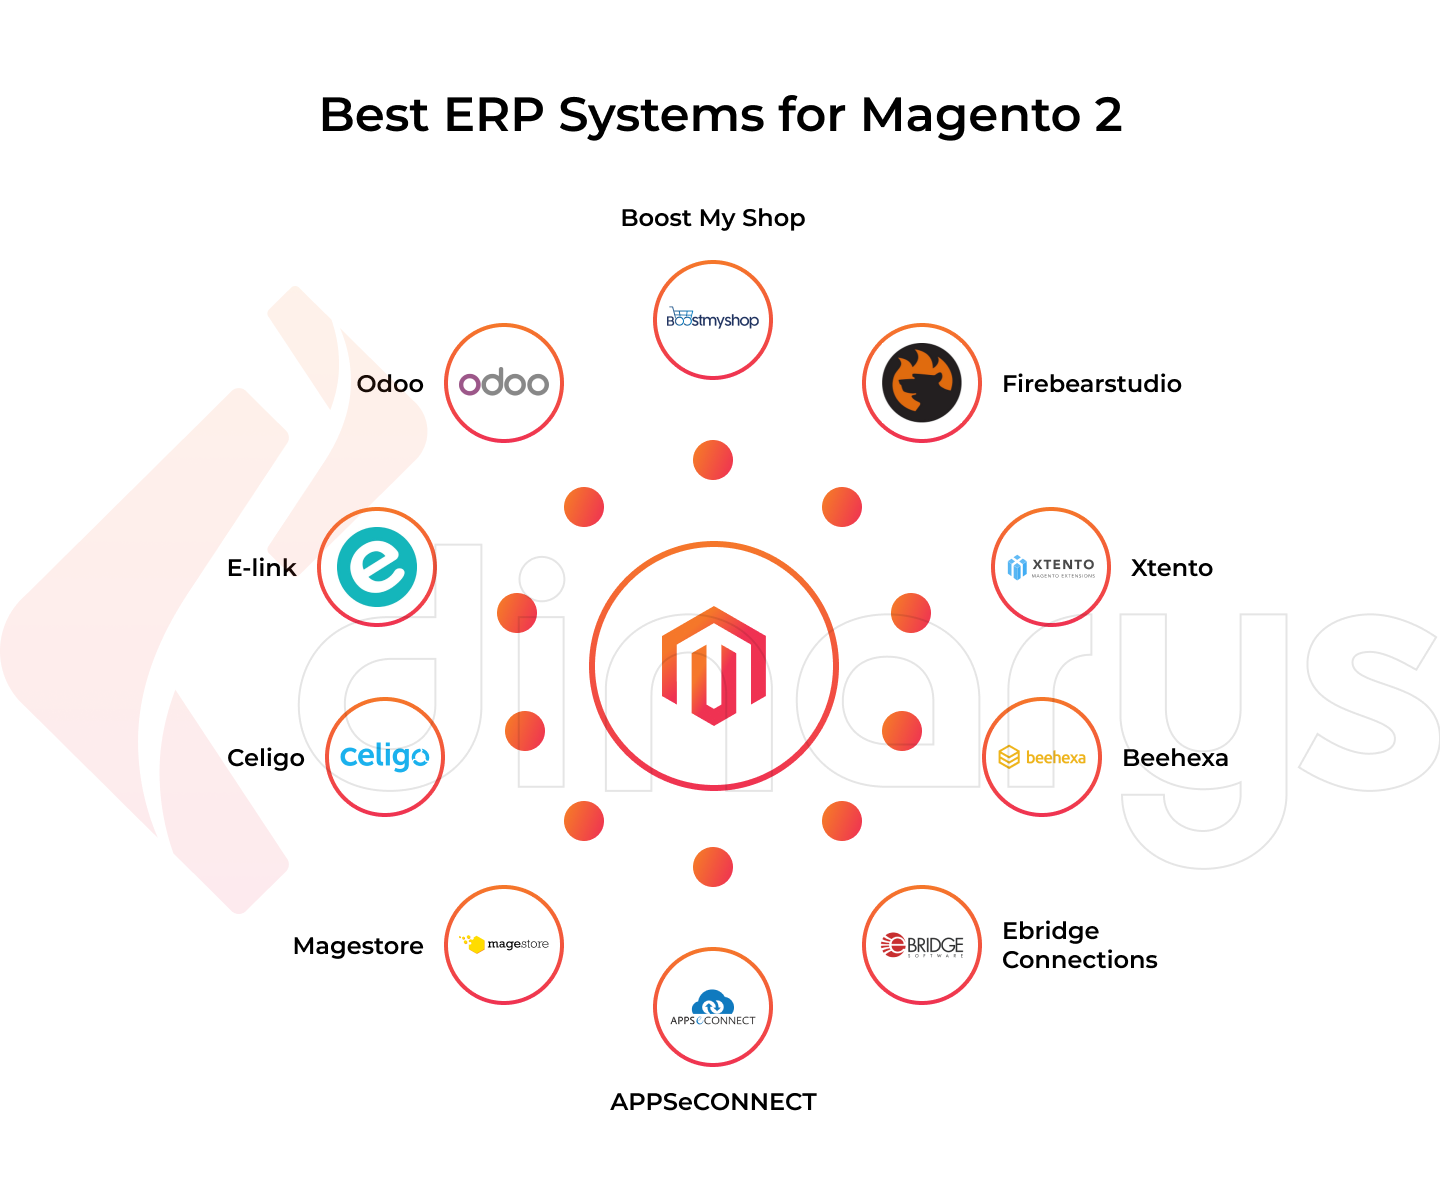 Best ERP Systems for Magento 2